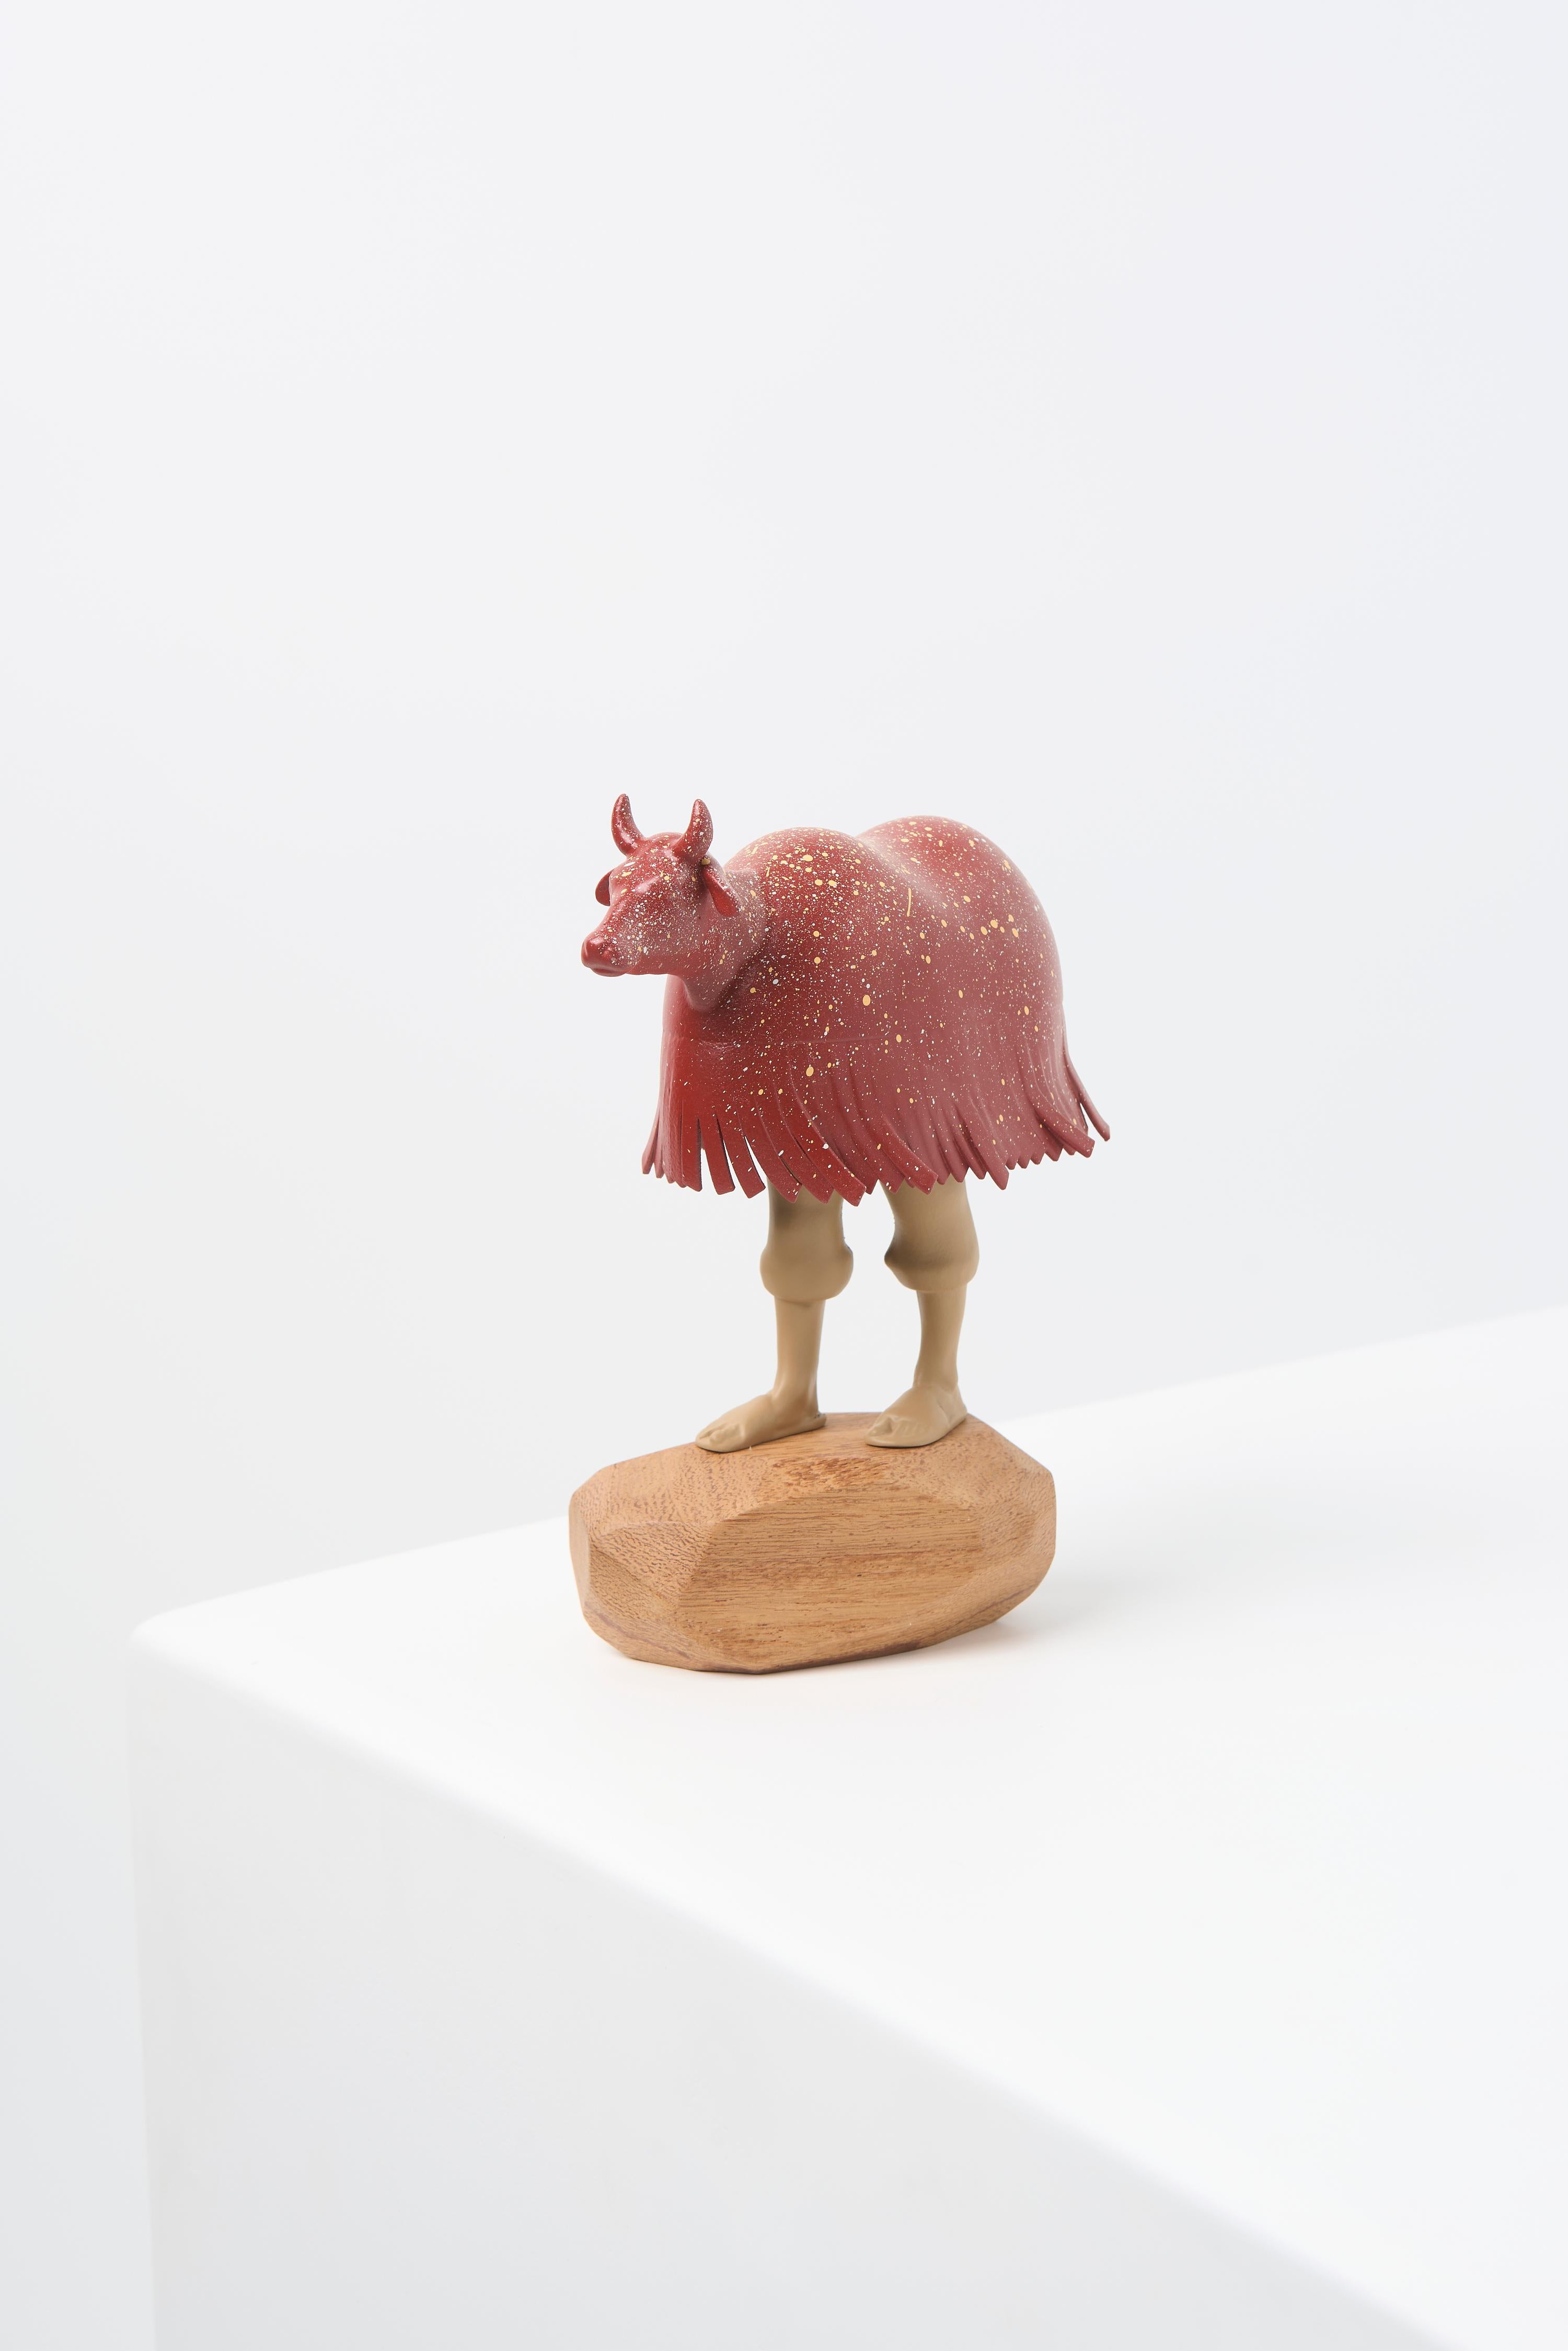 Minimalist Bumba Meu Boi Series, Resin Folklore Sculpture N1 with Wooden Base For Sale